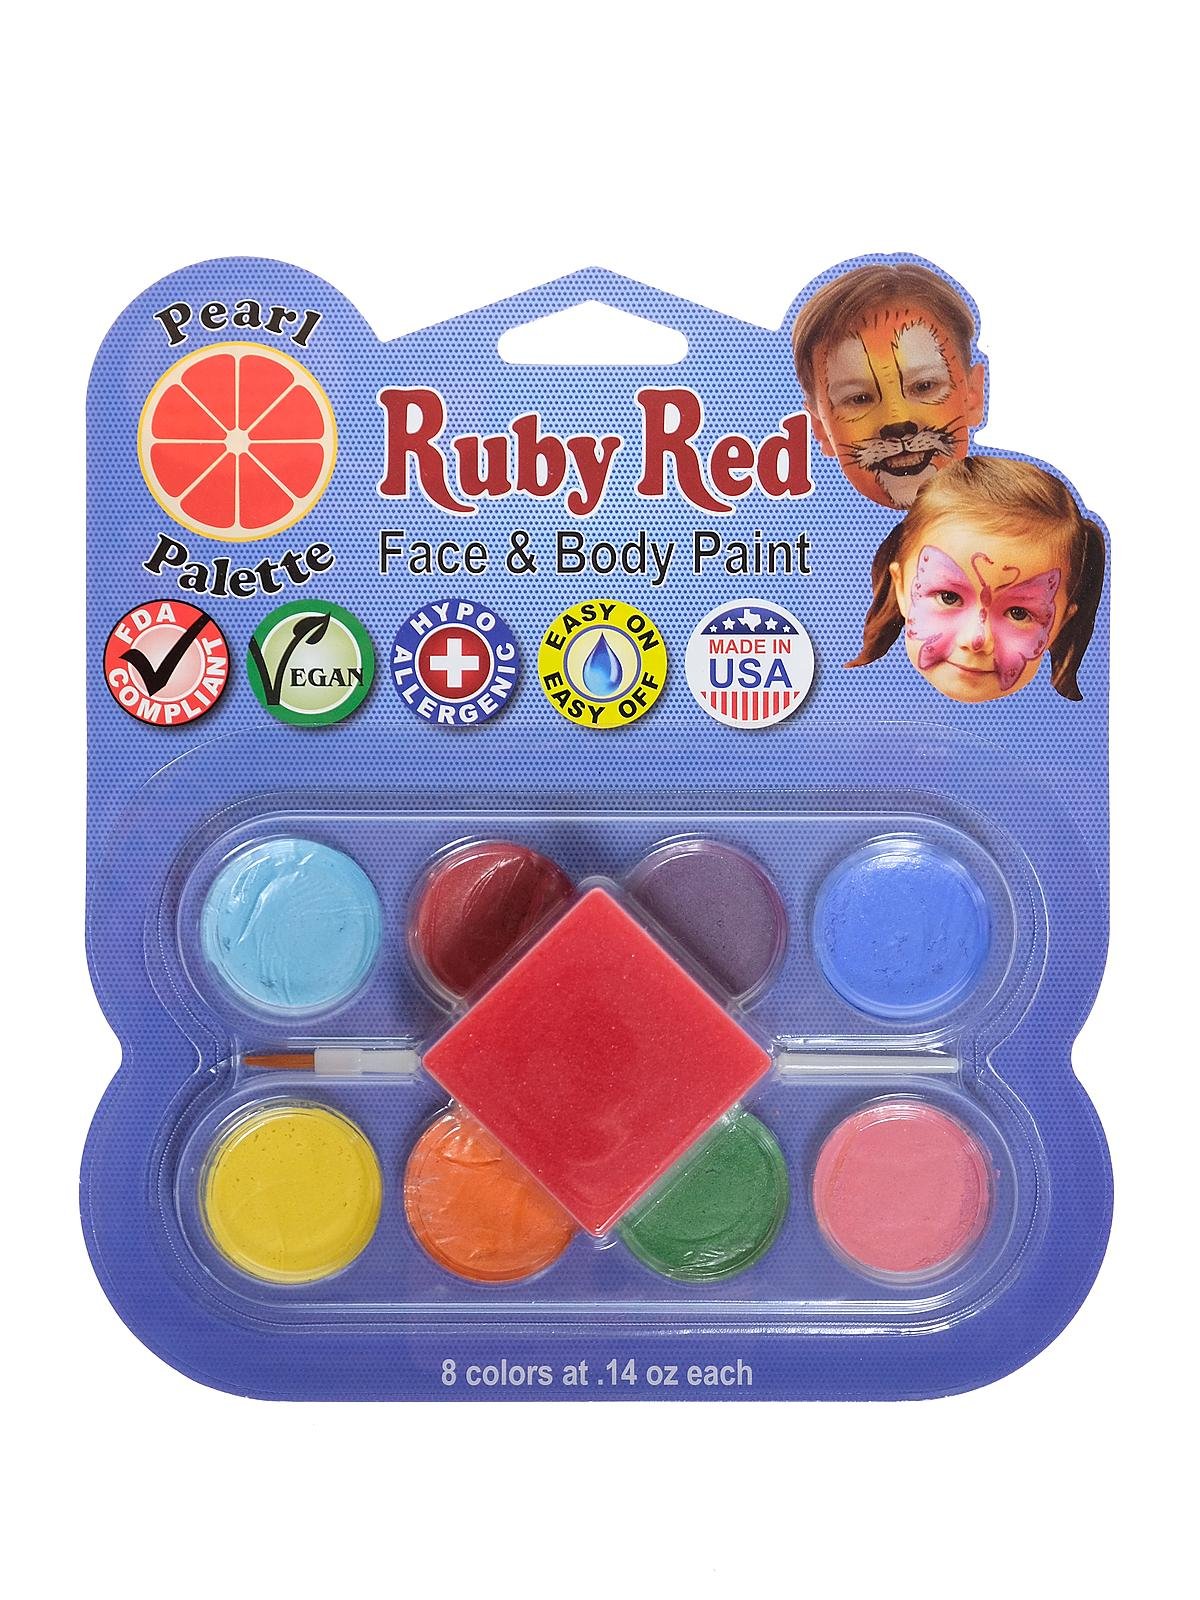 Ruby Red Face & Body Paint Palette Sets